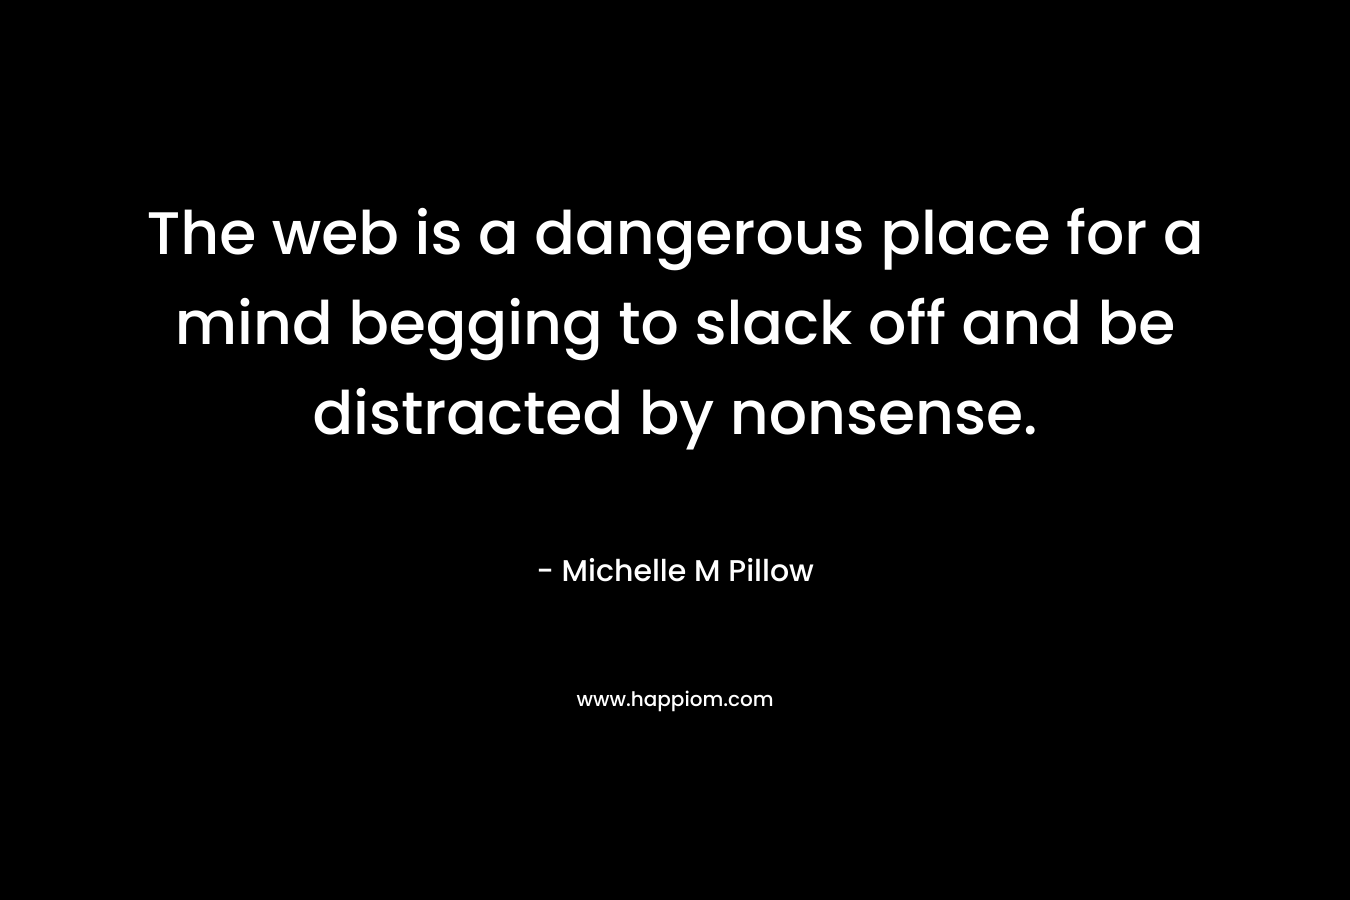 The web is a dangerous place for a mind begging to slack off and be distracted by nonsense.